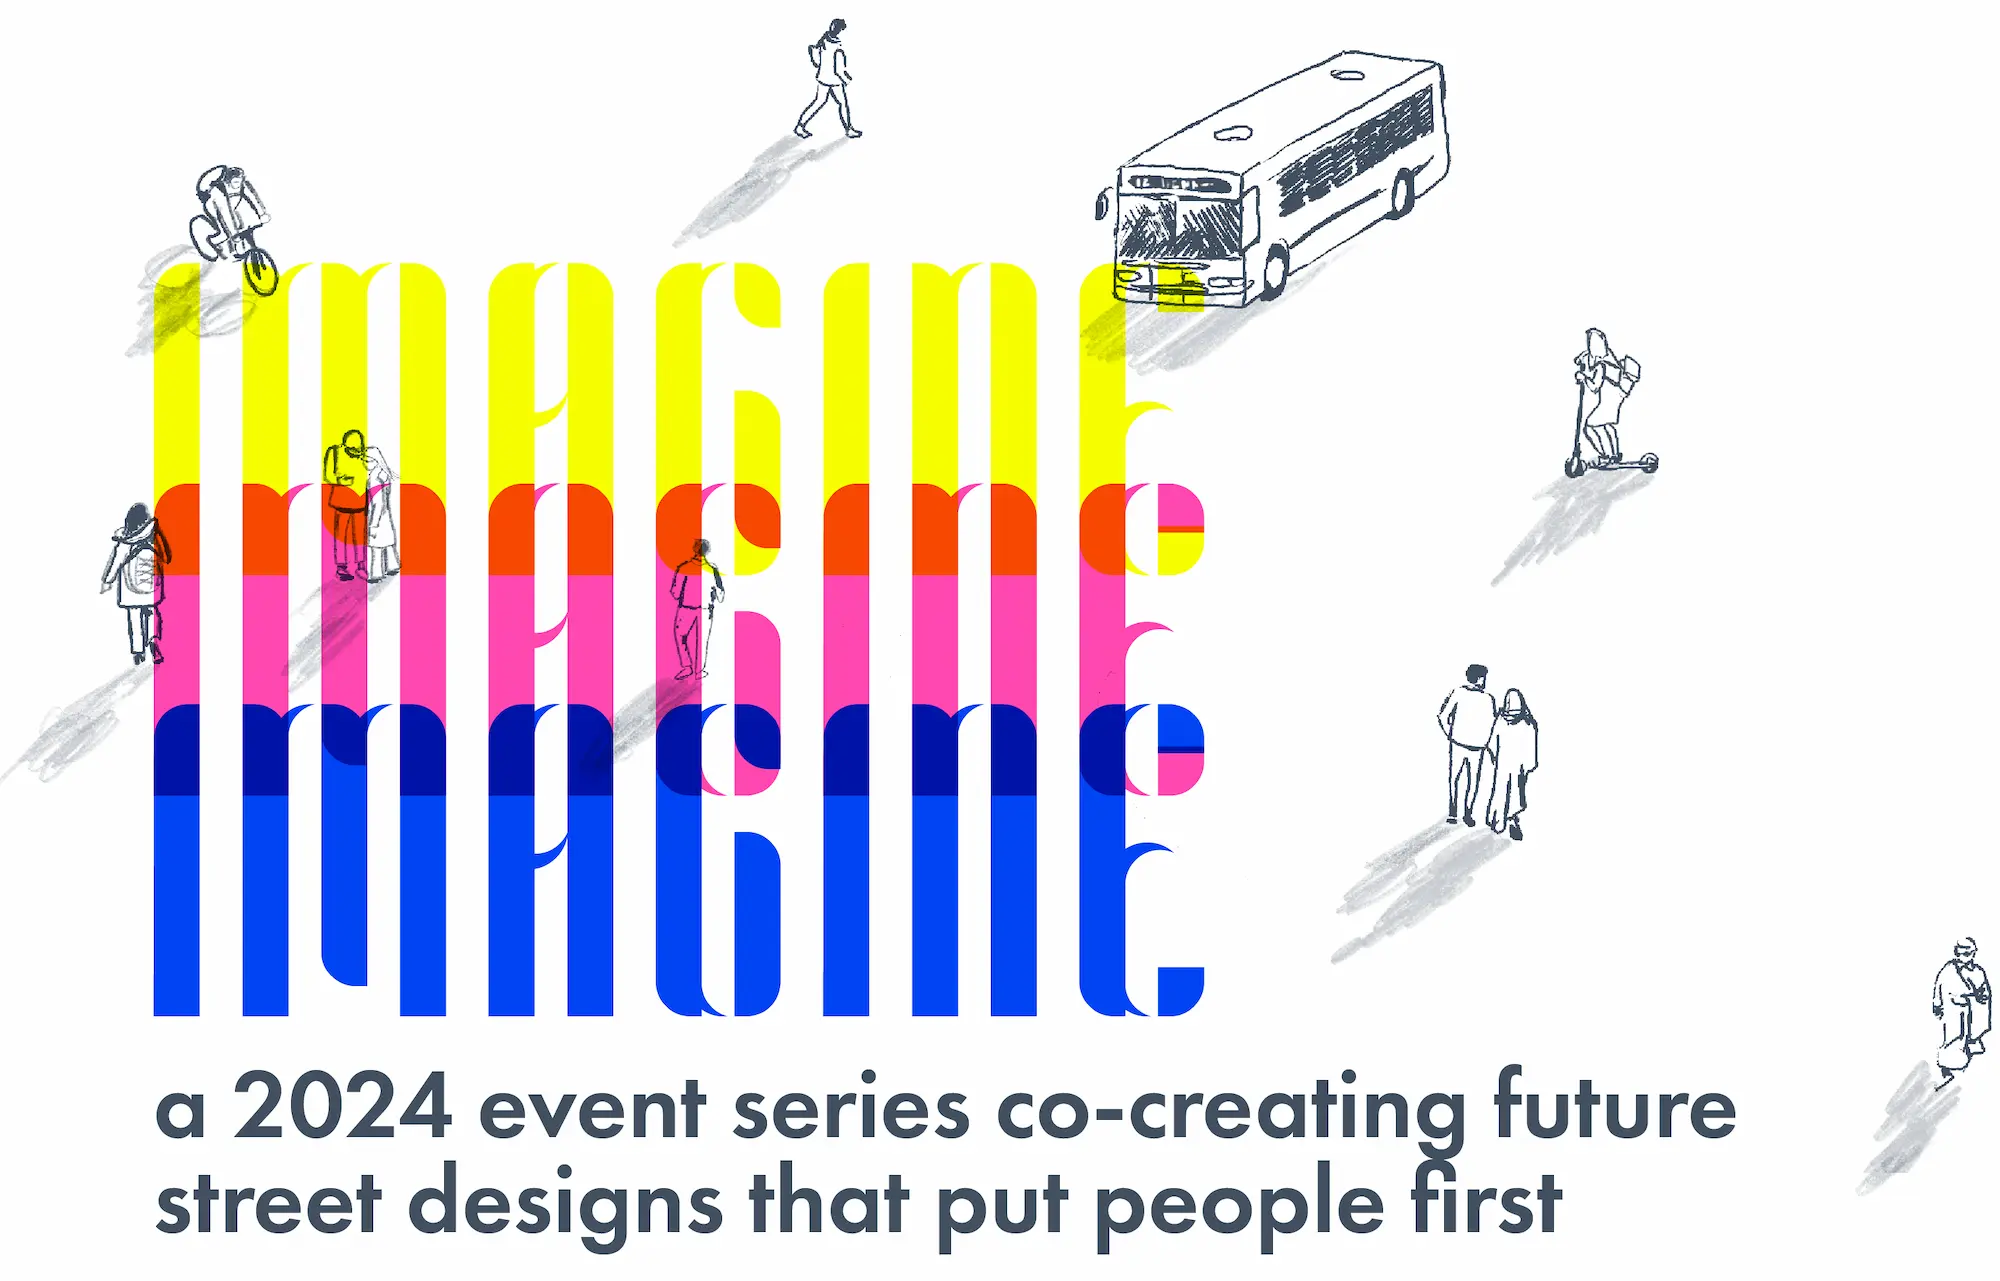 Text says "Imagine" in yellow, magenta, and blue. Below black text reads "a 2024 event series co-creating future street designs that put people first" White background with black line drawings of figures walking, riding scooters, biking, and a city bus.